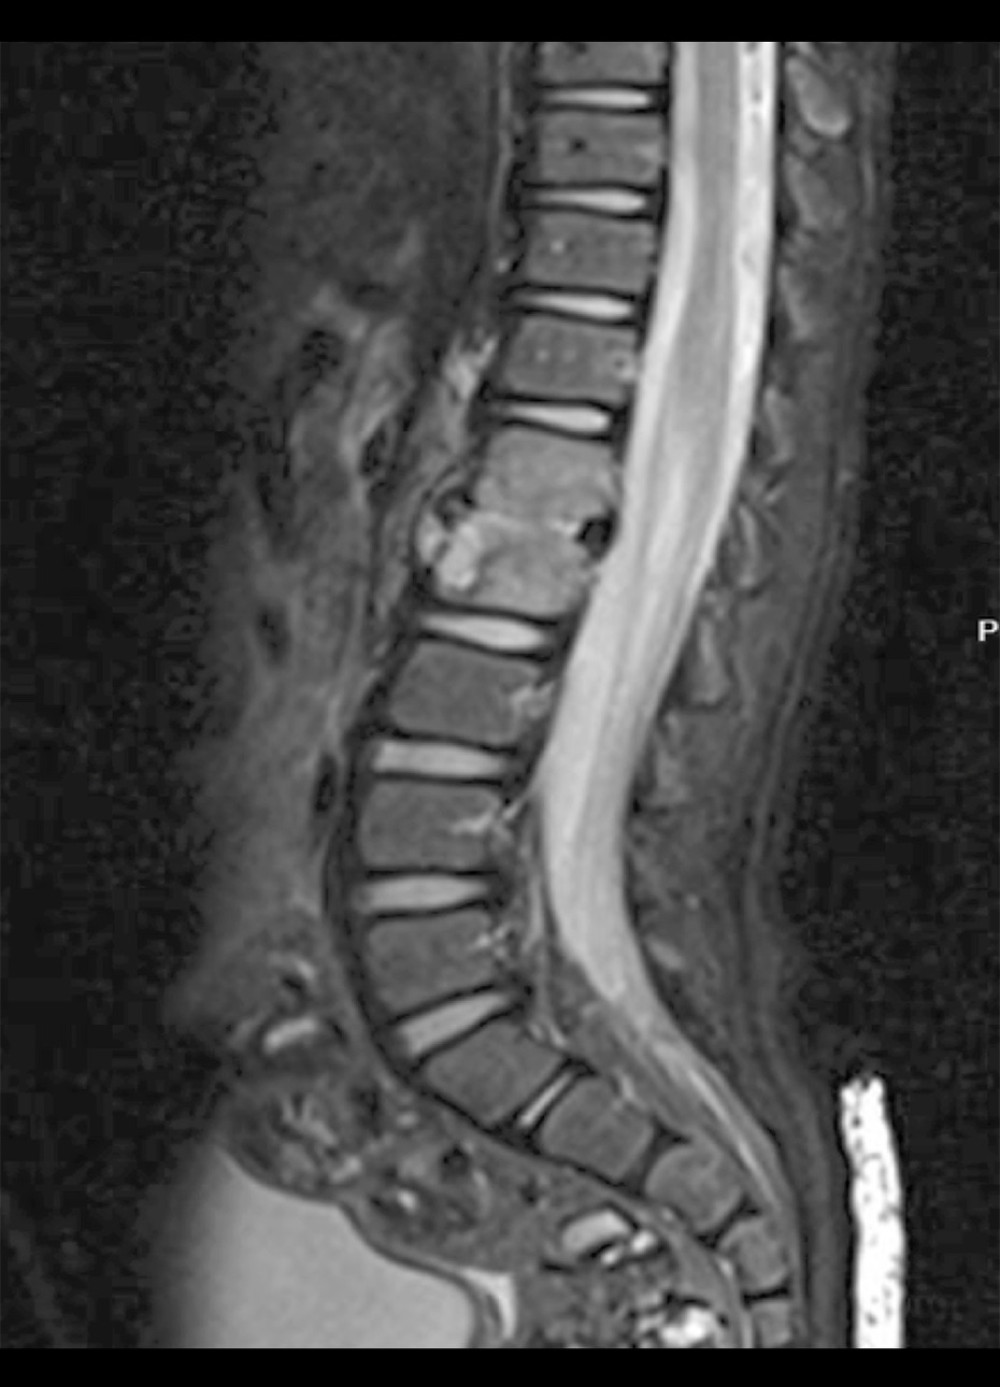 Lumbar spine MRI of a 21-month-old child with spondylodiscitis. Initial magnetic resonance imaging (MRI) of the lumbar spine with contrast, in which transverse relaxation time (T2) sequence sagittal view of the lumbar spine shows changes at lumbar vertebrae 1 (L1), while lumbar vertebrae 2 (L2) suggests spondylodiscitis associated with a small intervertebral disc collection.